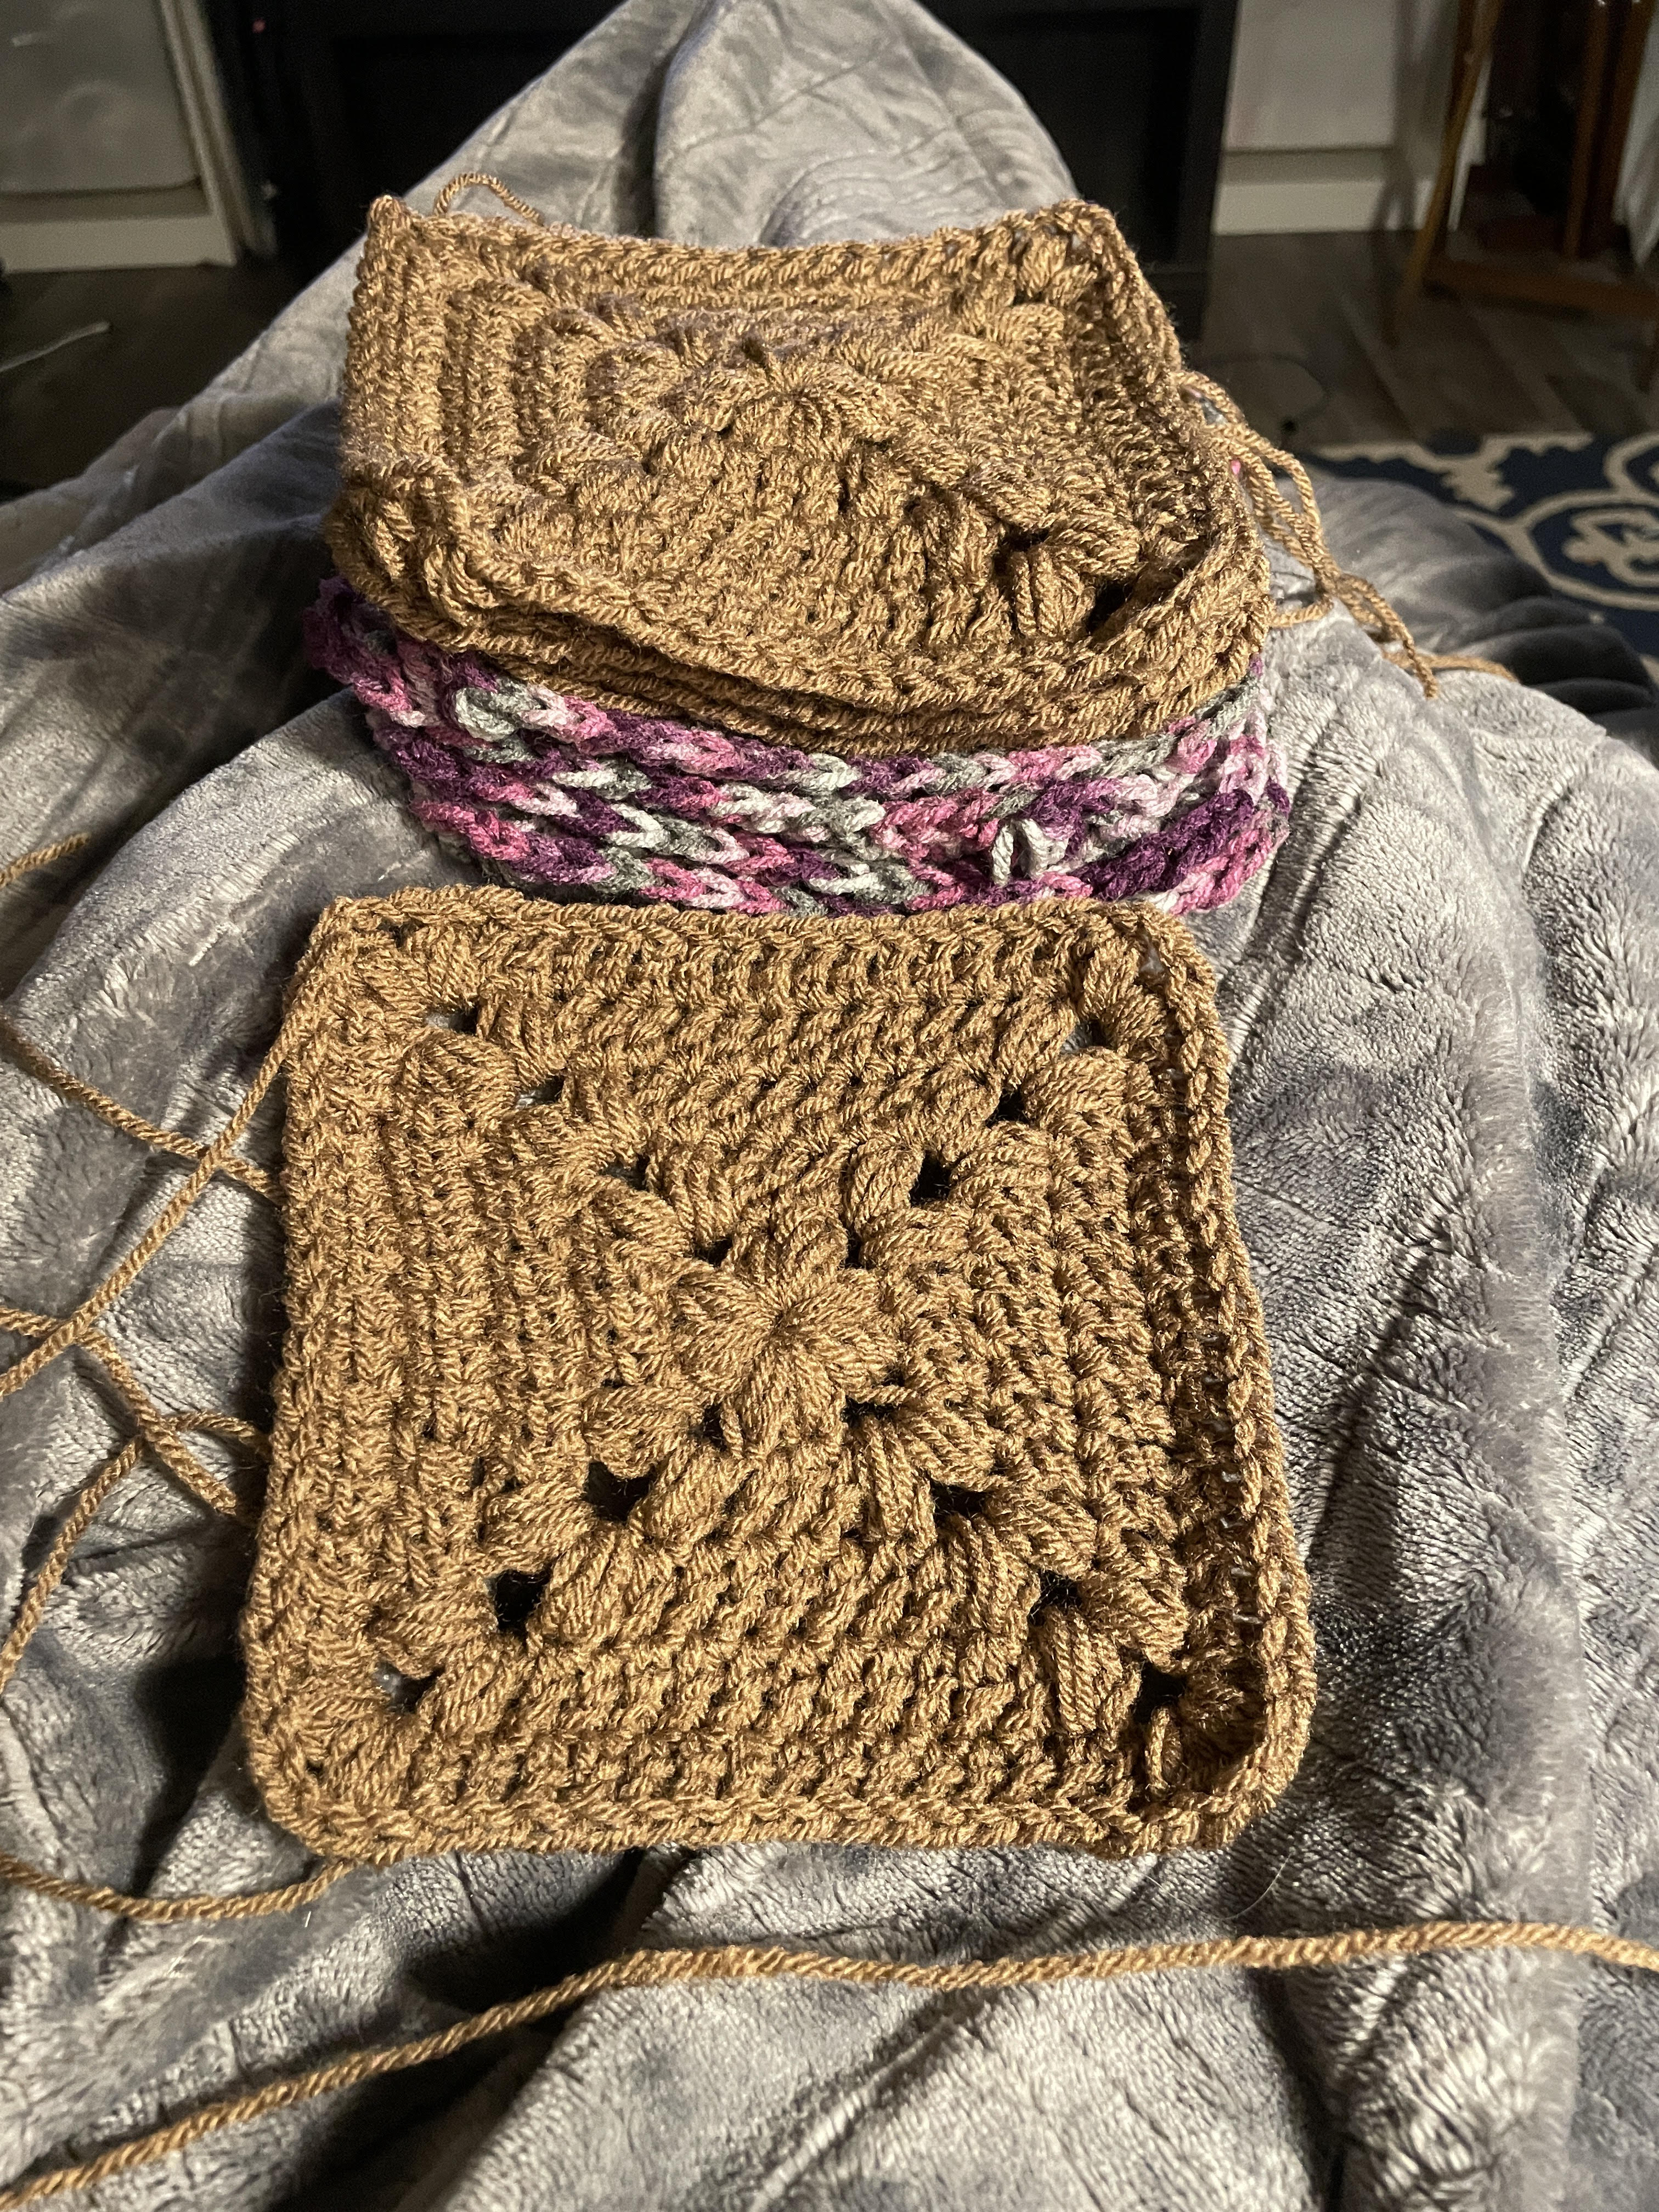 update on Granny squares